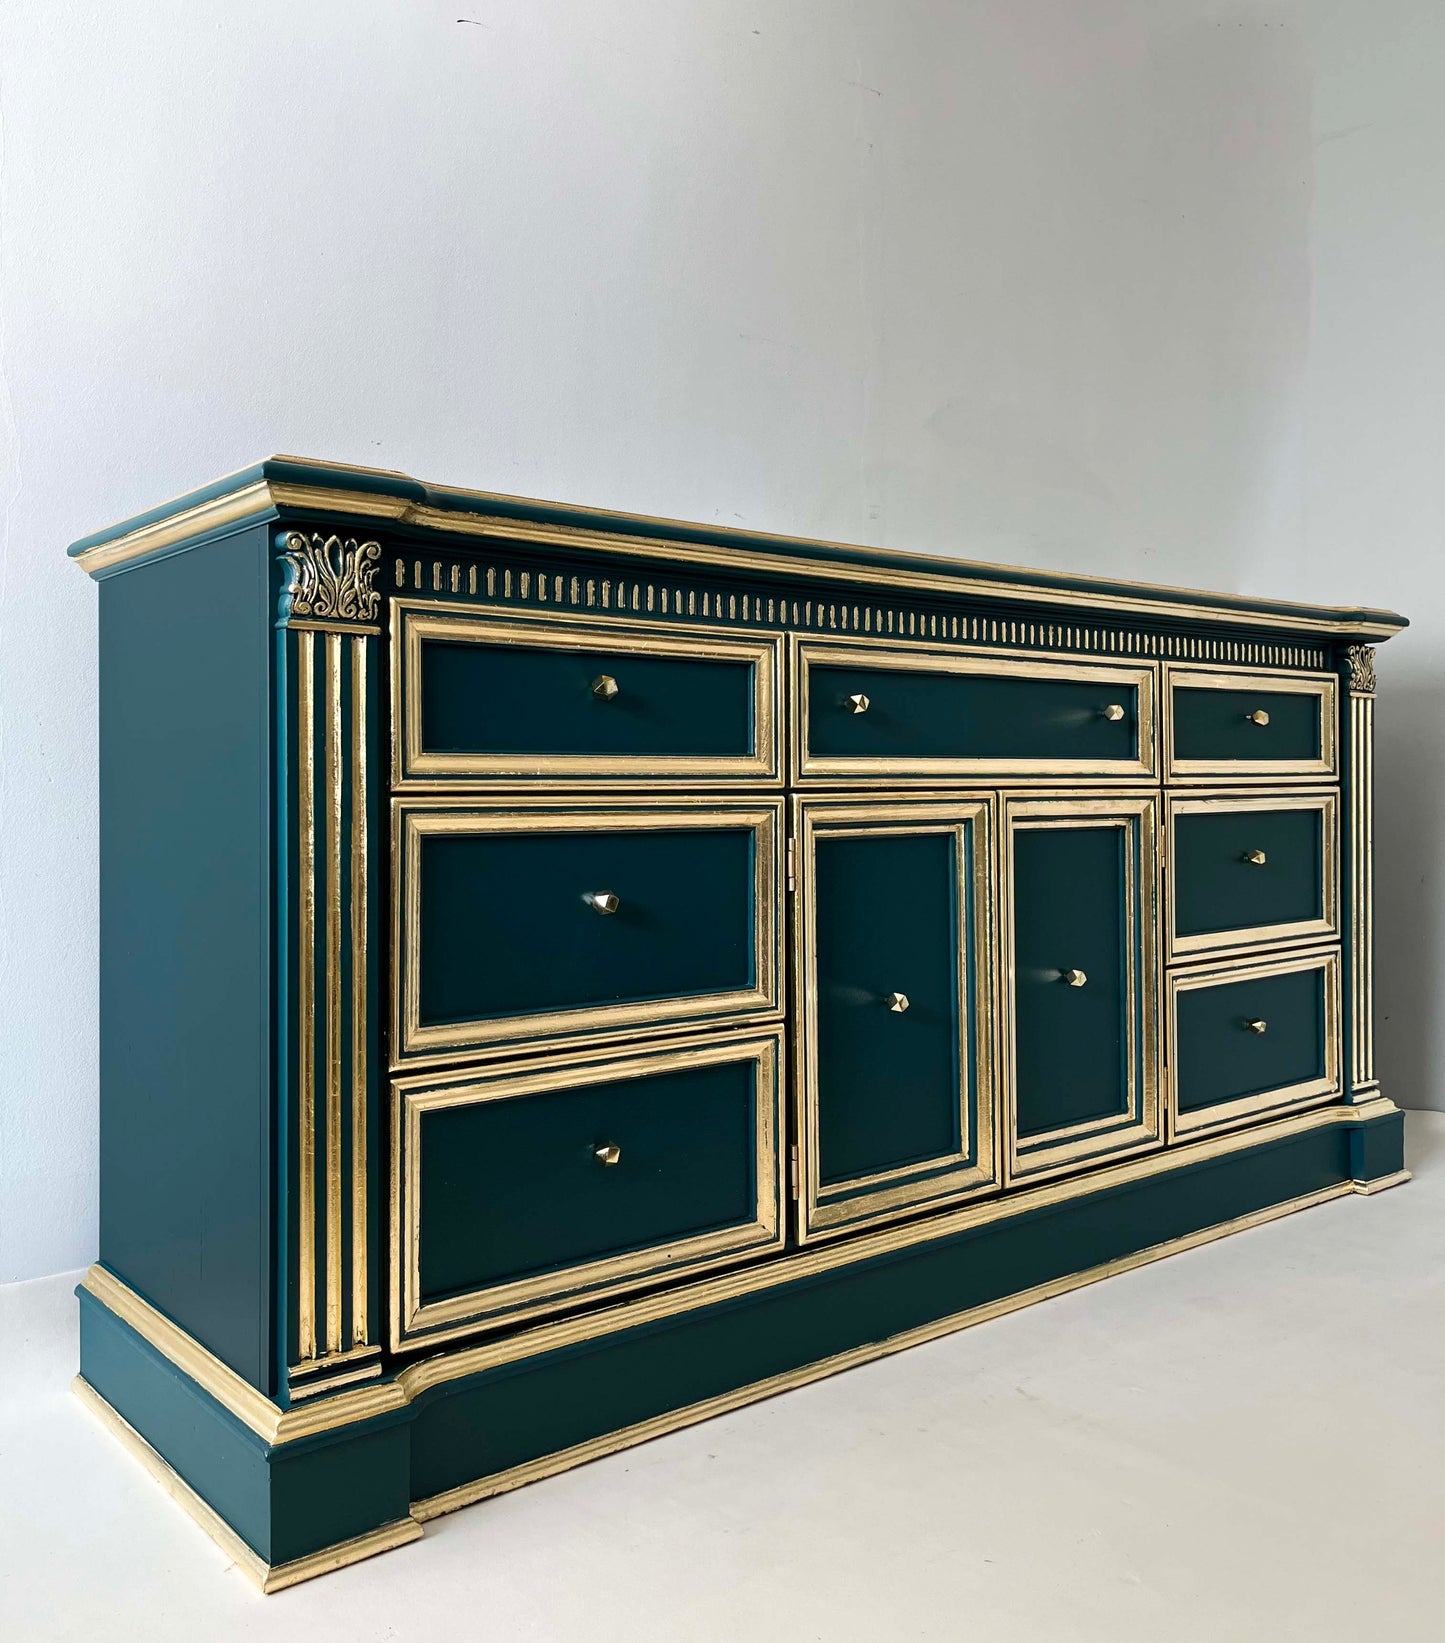 Upcycled Georgian style sideboard with gold